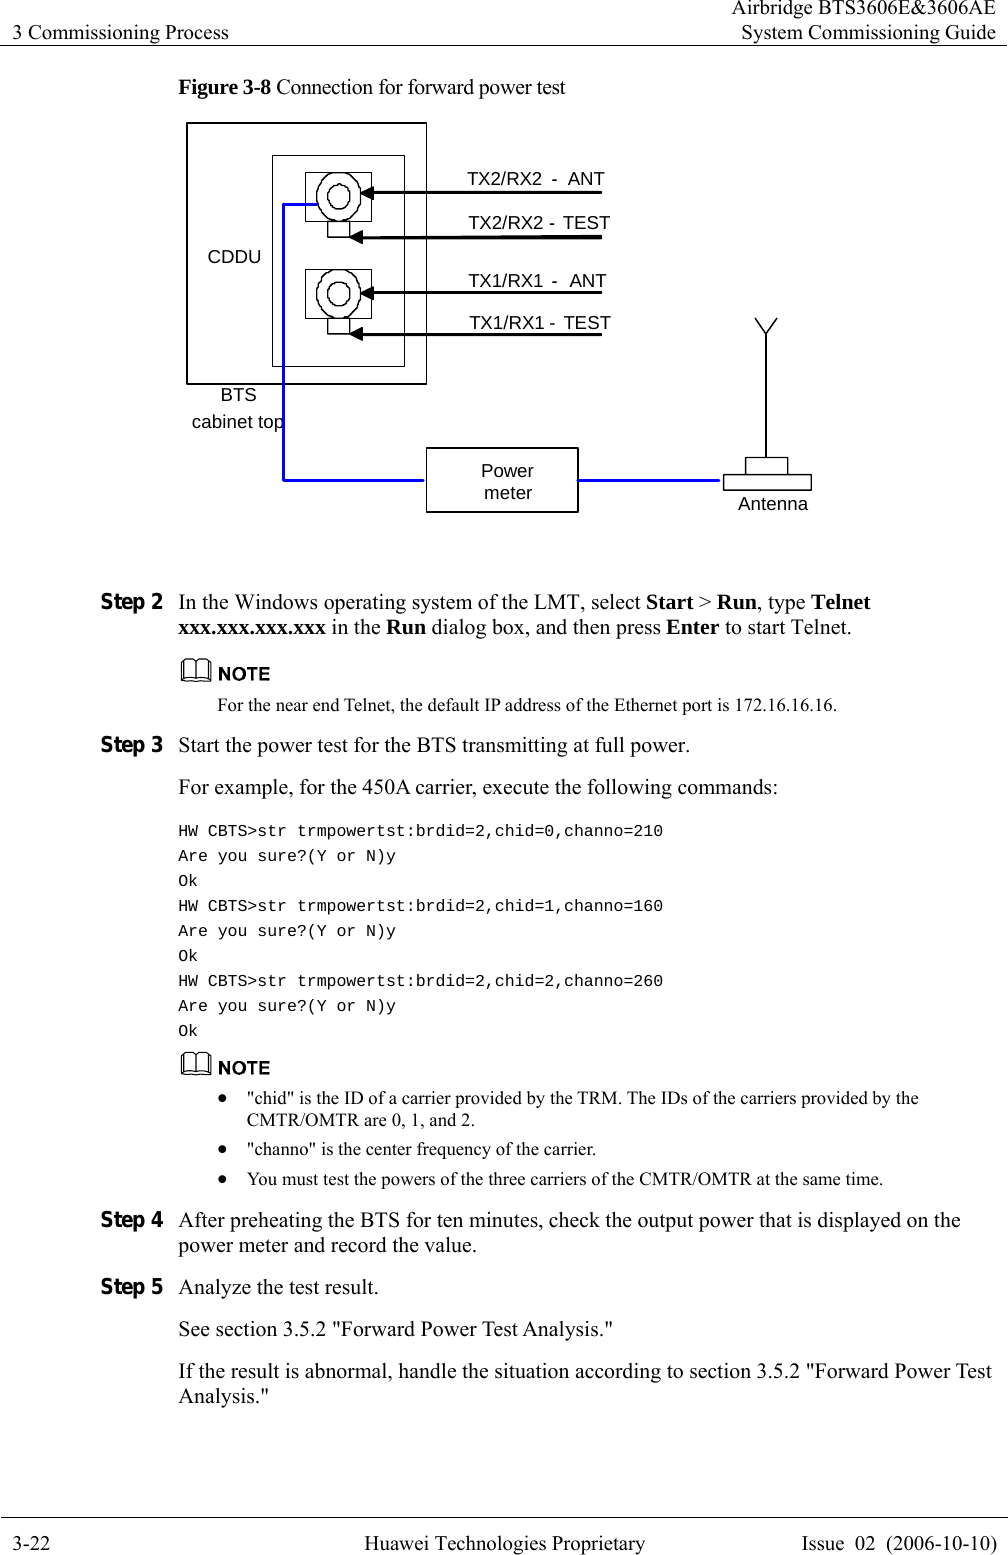 3 Commissioning Process Airbridge BTS3606E&amp;3606AESystem Commissioning Guide 3-22  Huawei Technologies Proprietary  Issue  02  (2006-10-10) Figure 3-8 Connection for forward power test TX2/RX2-ANTTX2/RX2-TESTTX1/RX1-ANTTX1/RX1 - TESTCDDUBTScabinet topPowermeter Antenna  Step 2 In the Windows operating system of the LMT, select Start &gt; Run, type Telnet xxx.xxx.xxx.xxx in the Run dialog box, and then press Enter to start Telnet.  For the near end Telnet, the default IP address of the Ethernet port is 172.16.16.16. Step 3 Start the power test for the BTS transmitting at full power.   For example, for the 450A carrier, execute the following commands: HW CBTS&gt;str trmpowertst:brdid=2,chid=0,channo=210 Are you sure?(Y or N)y Ok HW CBTS&gt;str trmpowertst:brdid=2,chid=1,channo=160 Are you sure?(Y or N)y Ok HW CBTS&gt;str trmpowertst:brdid=2,chid=2,channo=260 Are you sure?(Y or N)y Ok  z &quot;chid&quot; is the ID of a carrier provided by the TRM. The IDs of the carriers provided by the CMTR/OMTR are 0, 1, and 2. z &quot;channo&quot; is the center frequency of the carrier. z You must test the powers of the three carriers of the CMTR/OMTR at the same time.   Step 4 After preheating the BTS for ten minutes, check the output power that is displayed on the power meter and record the value.   Step 5 Analyze the test result.   See section 3.5.2 &quot;Forward Power Test Analysis.&quot; If the result is abnormal, handle the situation according to section 3.5.2 &quot;Forward Power Test Analysis.&quot; 